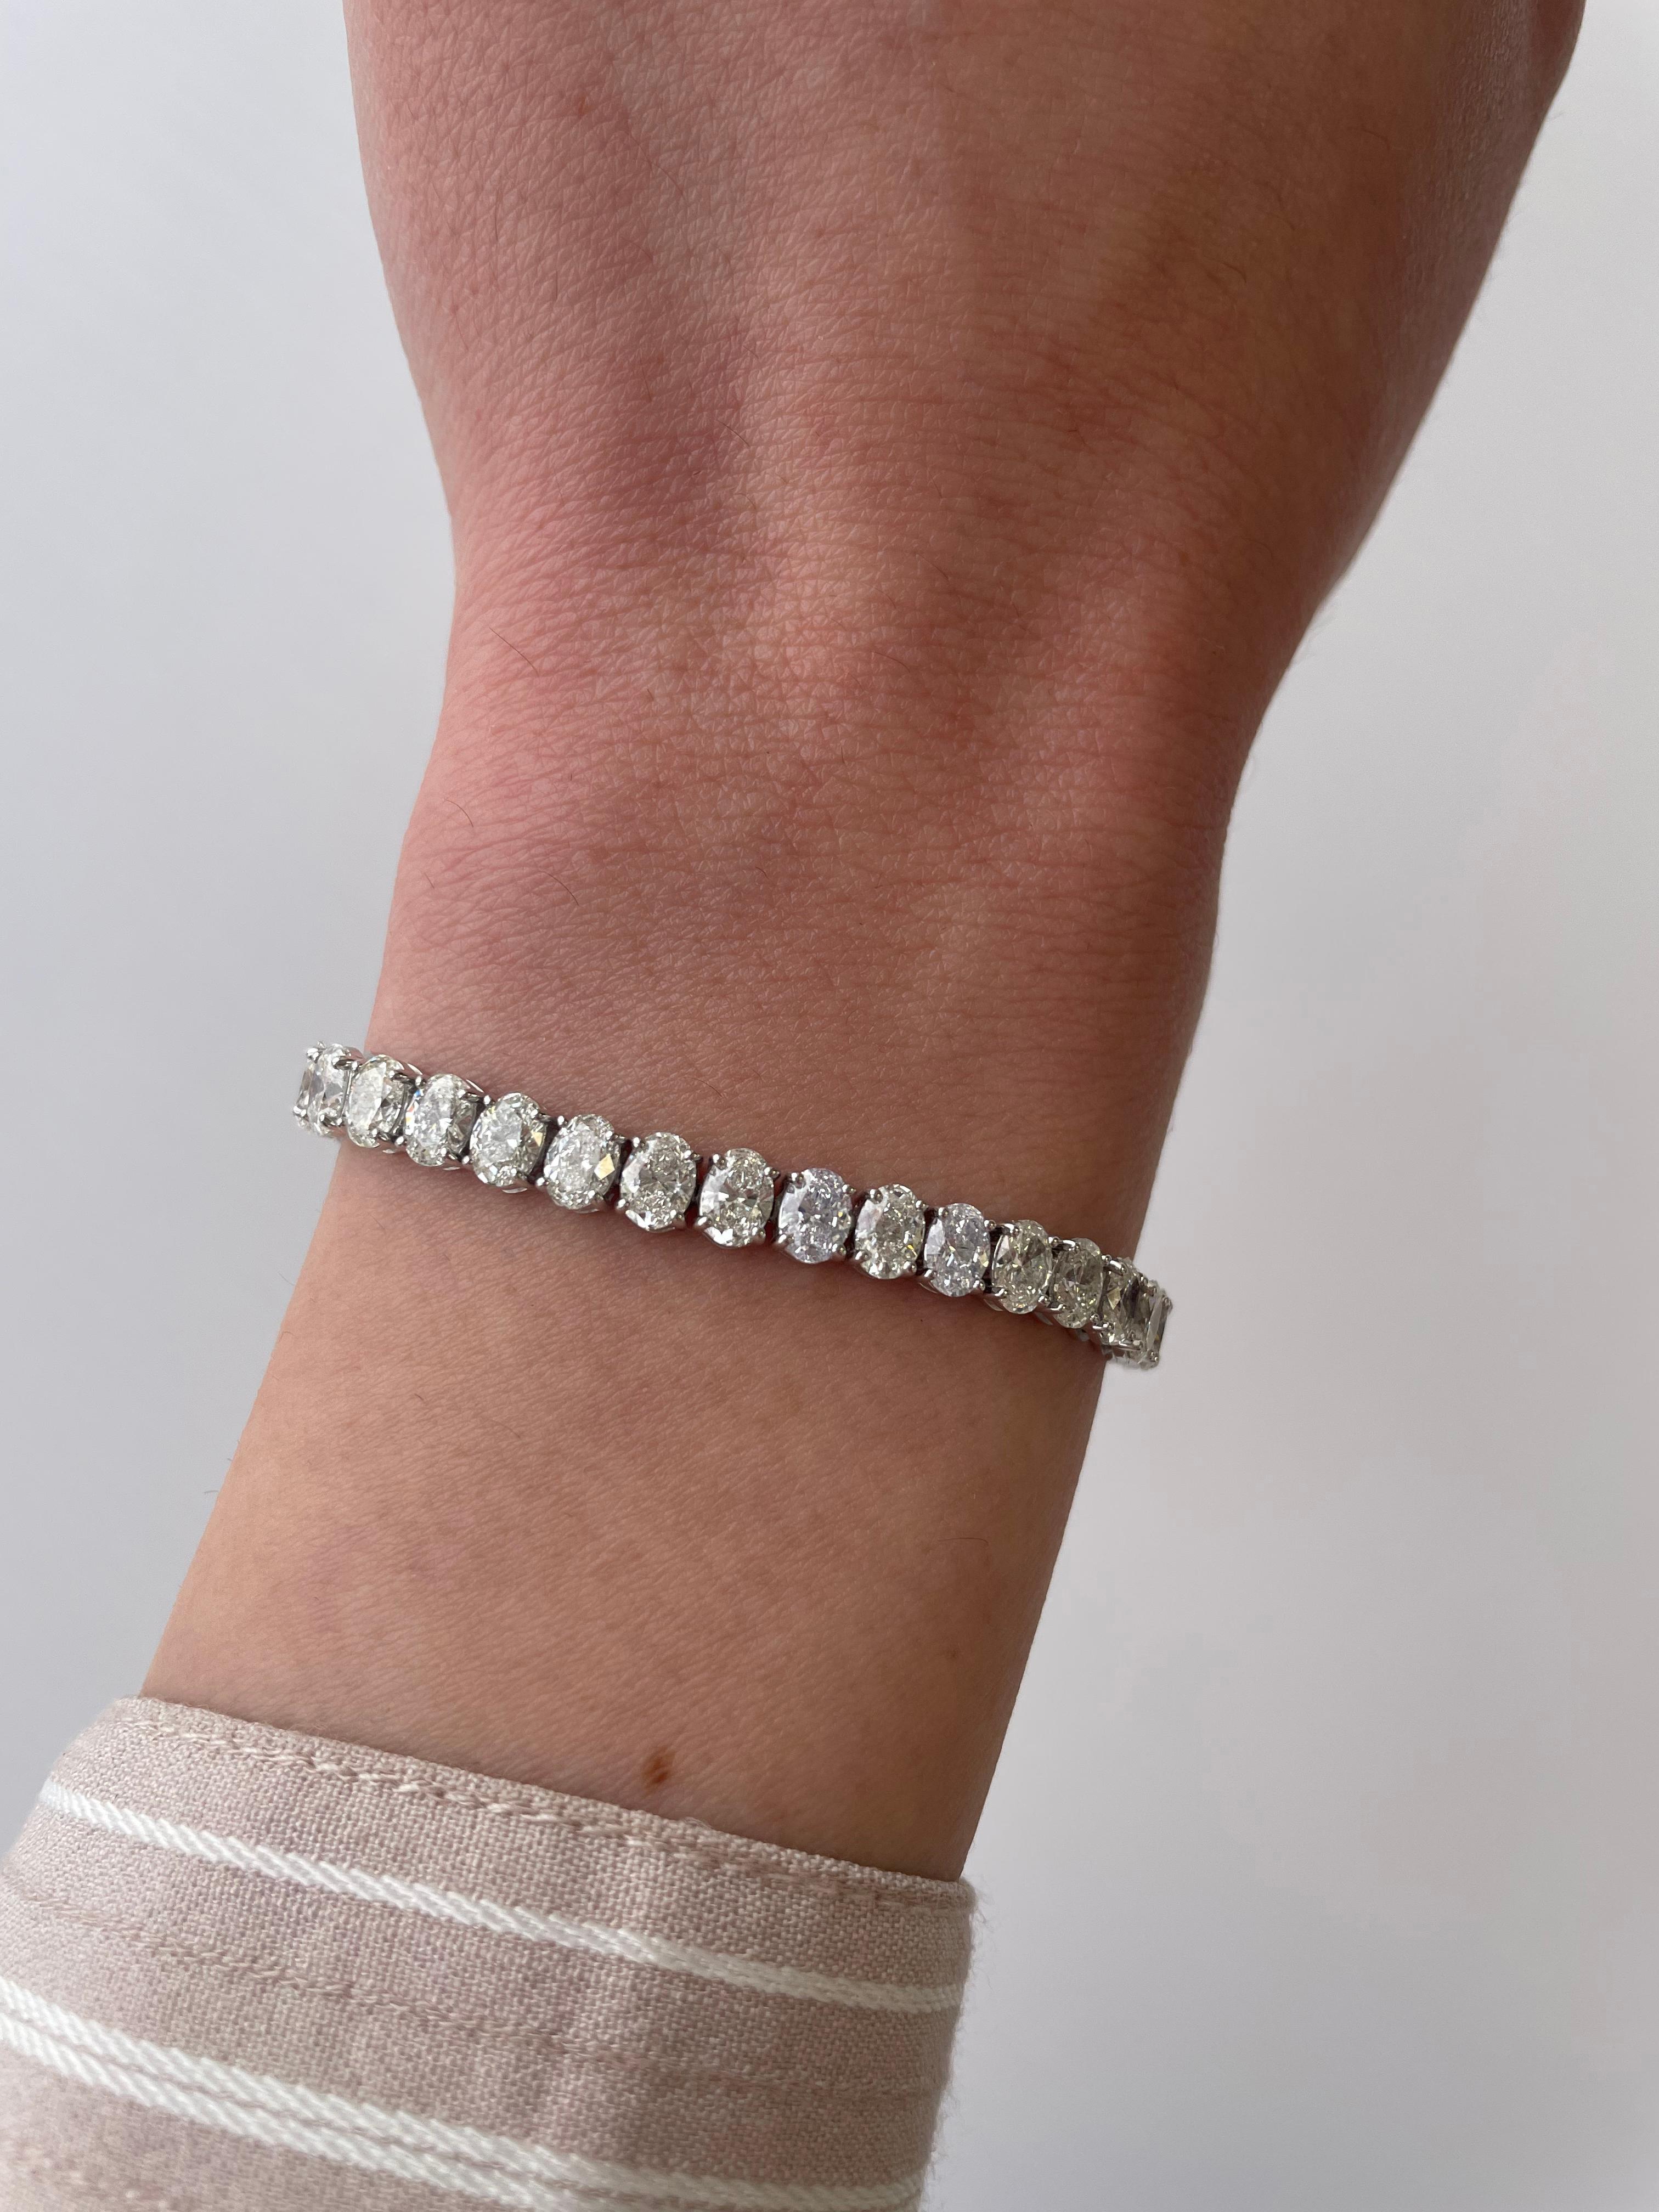 Stunning modern straight oval cut diamond tennis bracelet. High jewelry by Alexander Beverly Hills.
45 oval cut diamonds, 13.65 carats. Approximately H/I color and SI clarity. 18k white gold, 18.17 grams, 7 inches.
Accommodated with an up-to-date